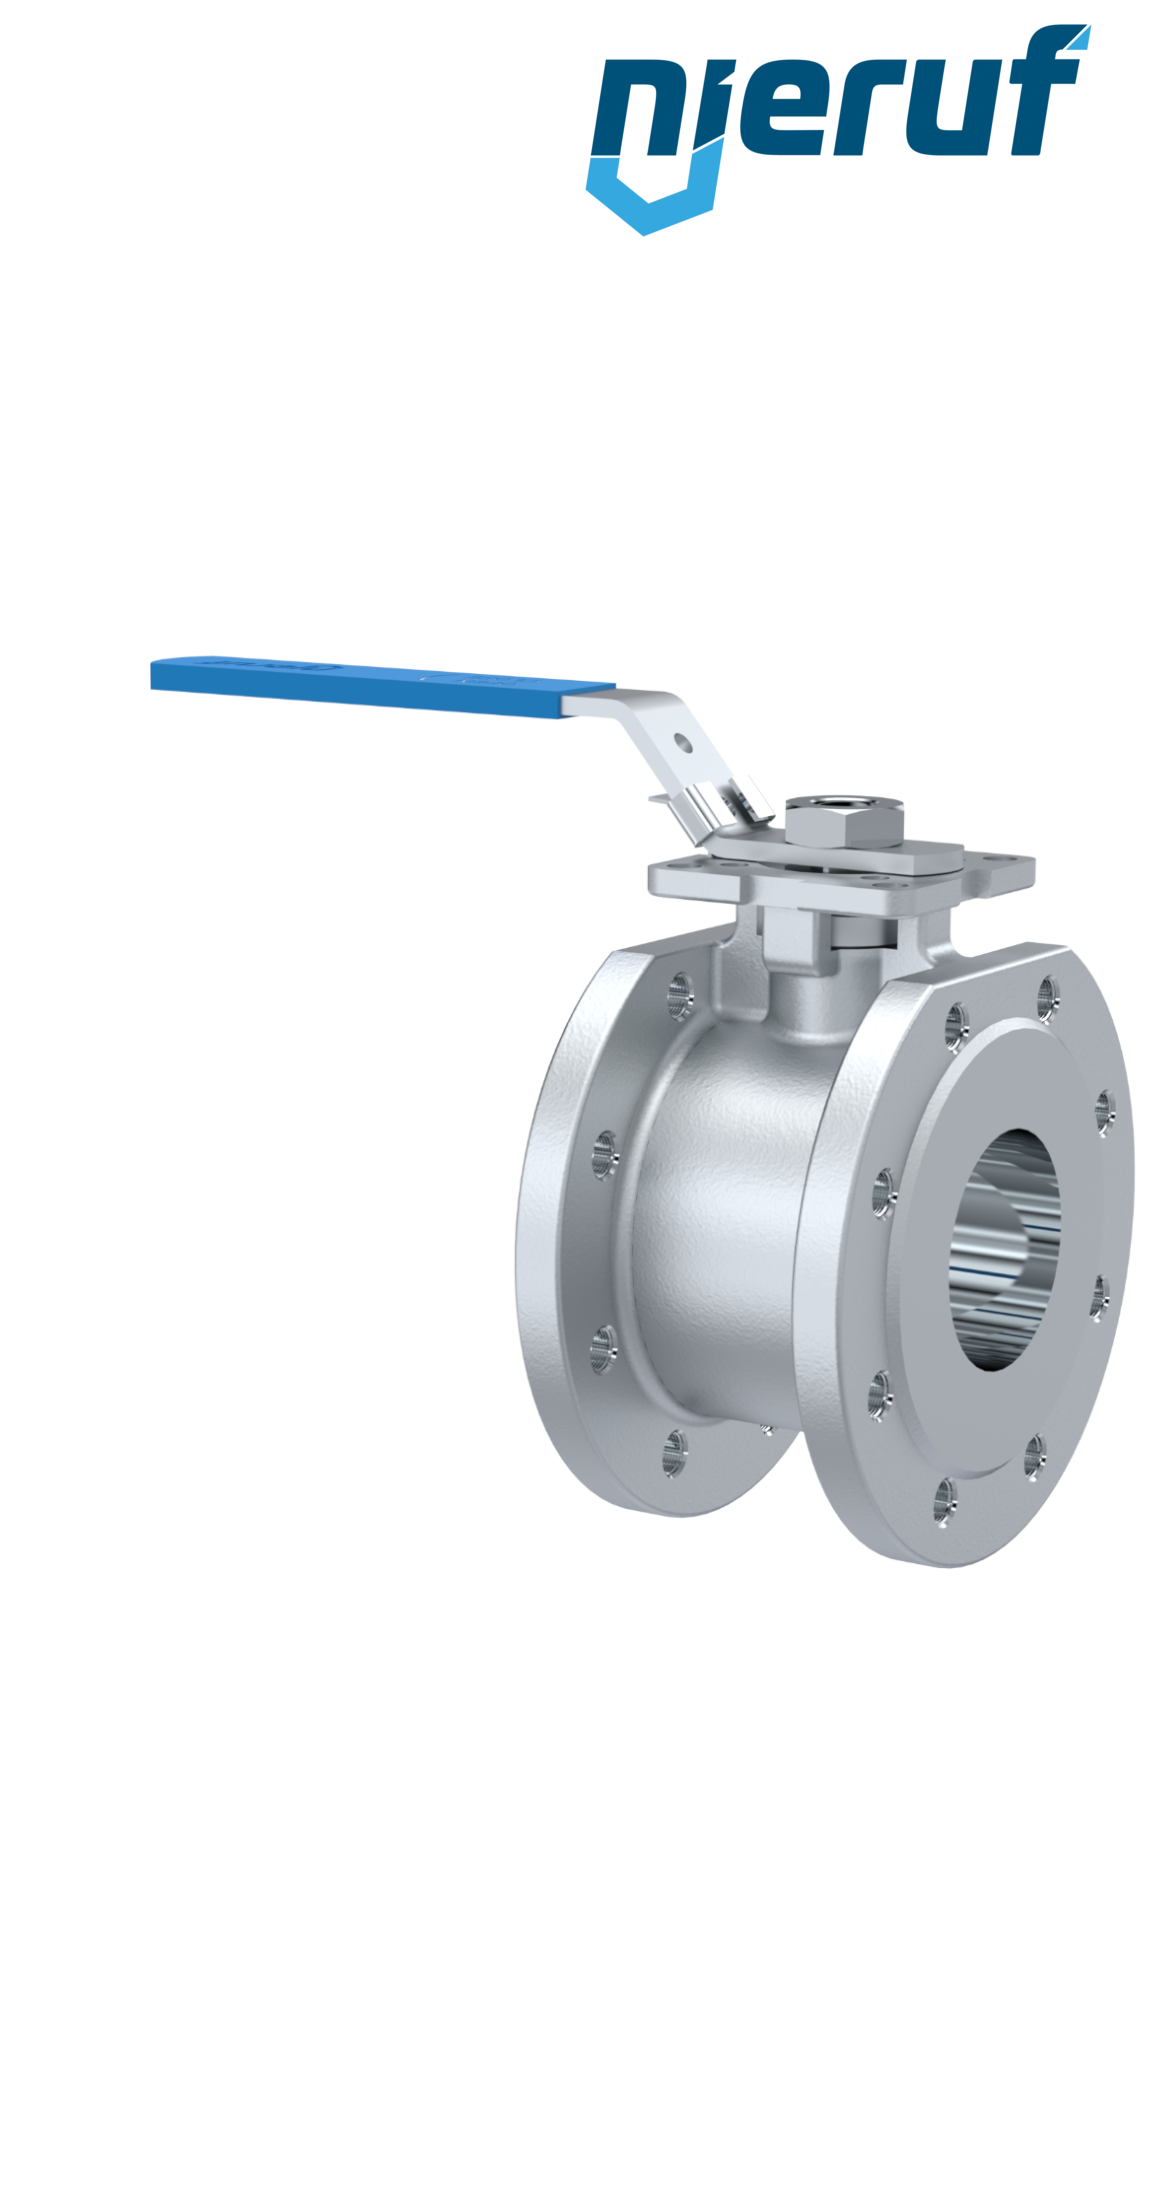 Compact ball valve DN80 PN16 FK04 stainless steel 1.4408